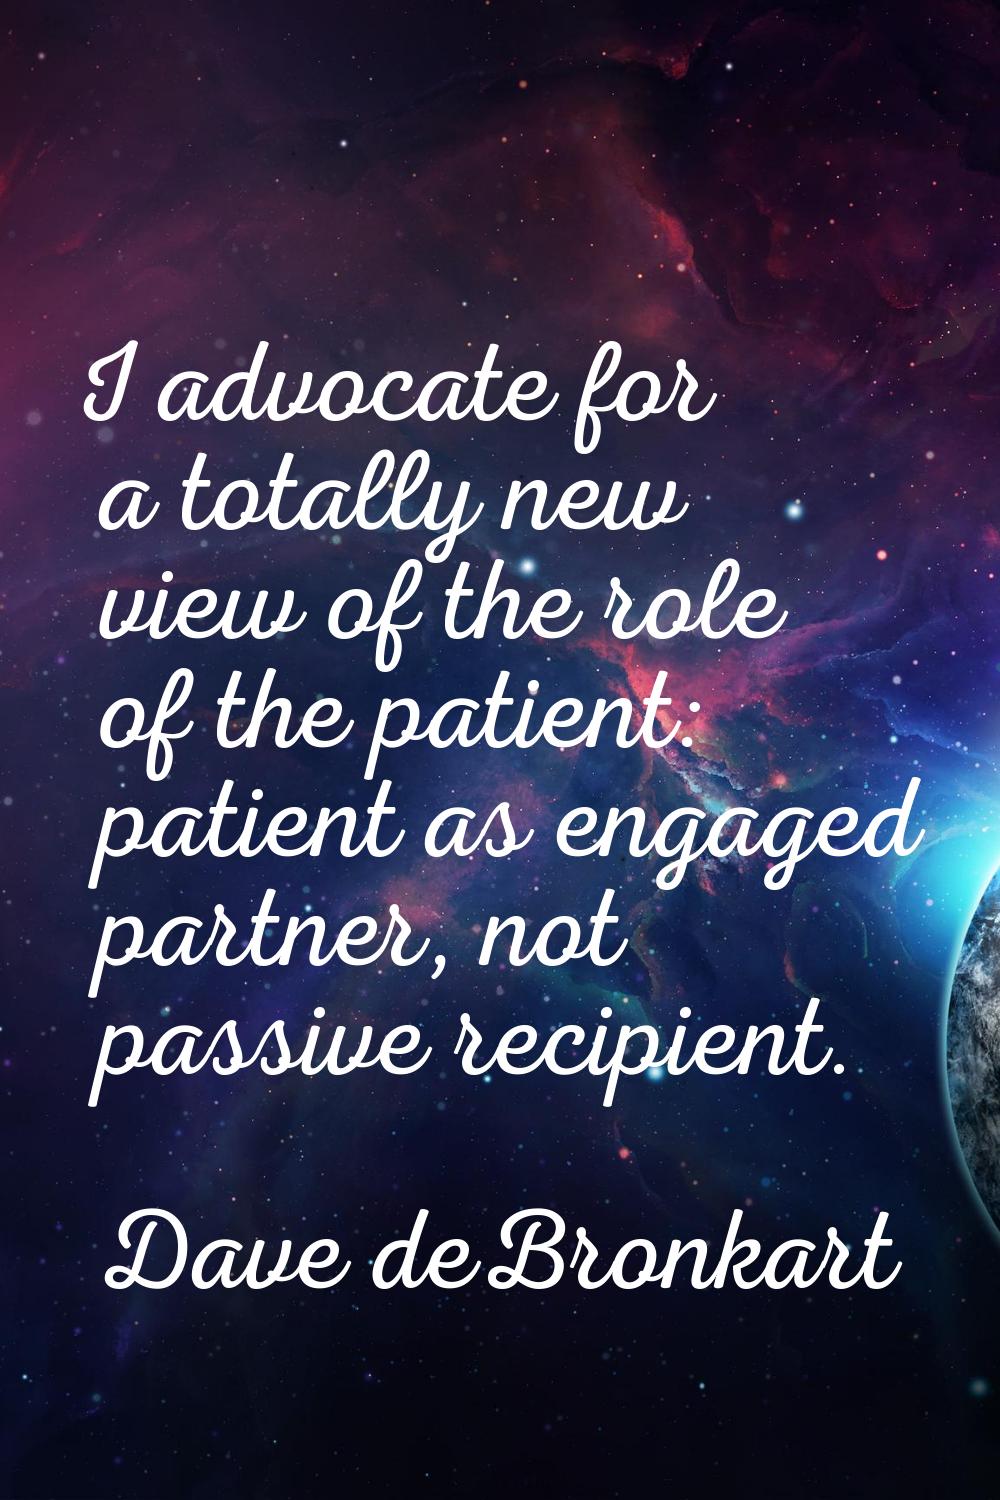 I advocate for a totally new view of the role of the patient: patient as engaged partner, not passi